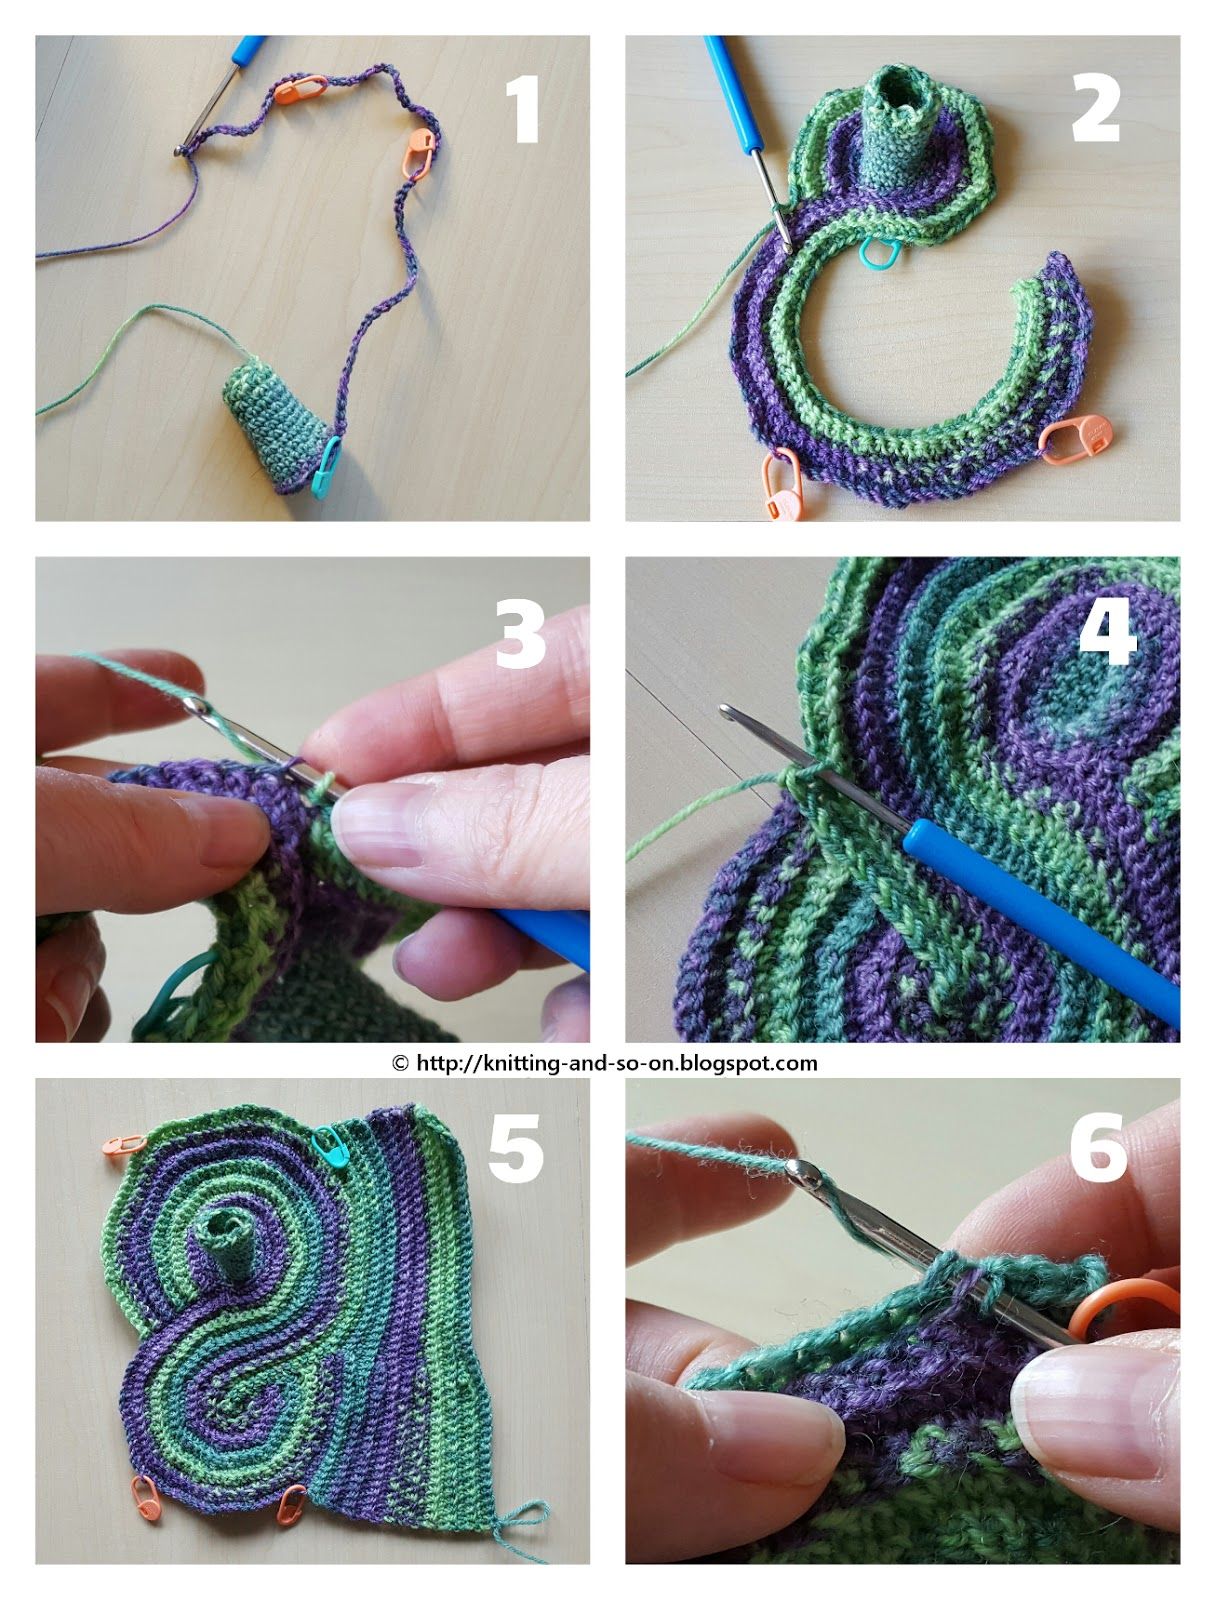 Pieces-of-Eight-Fingerless-Gloves-Free-Knitting-and-Crochet-Pattern.jpg